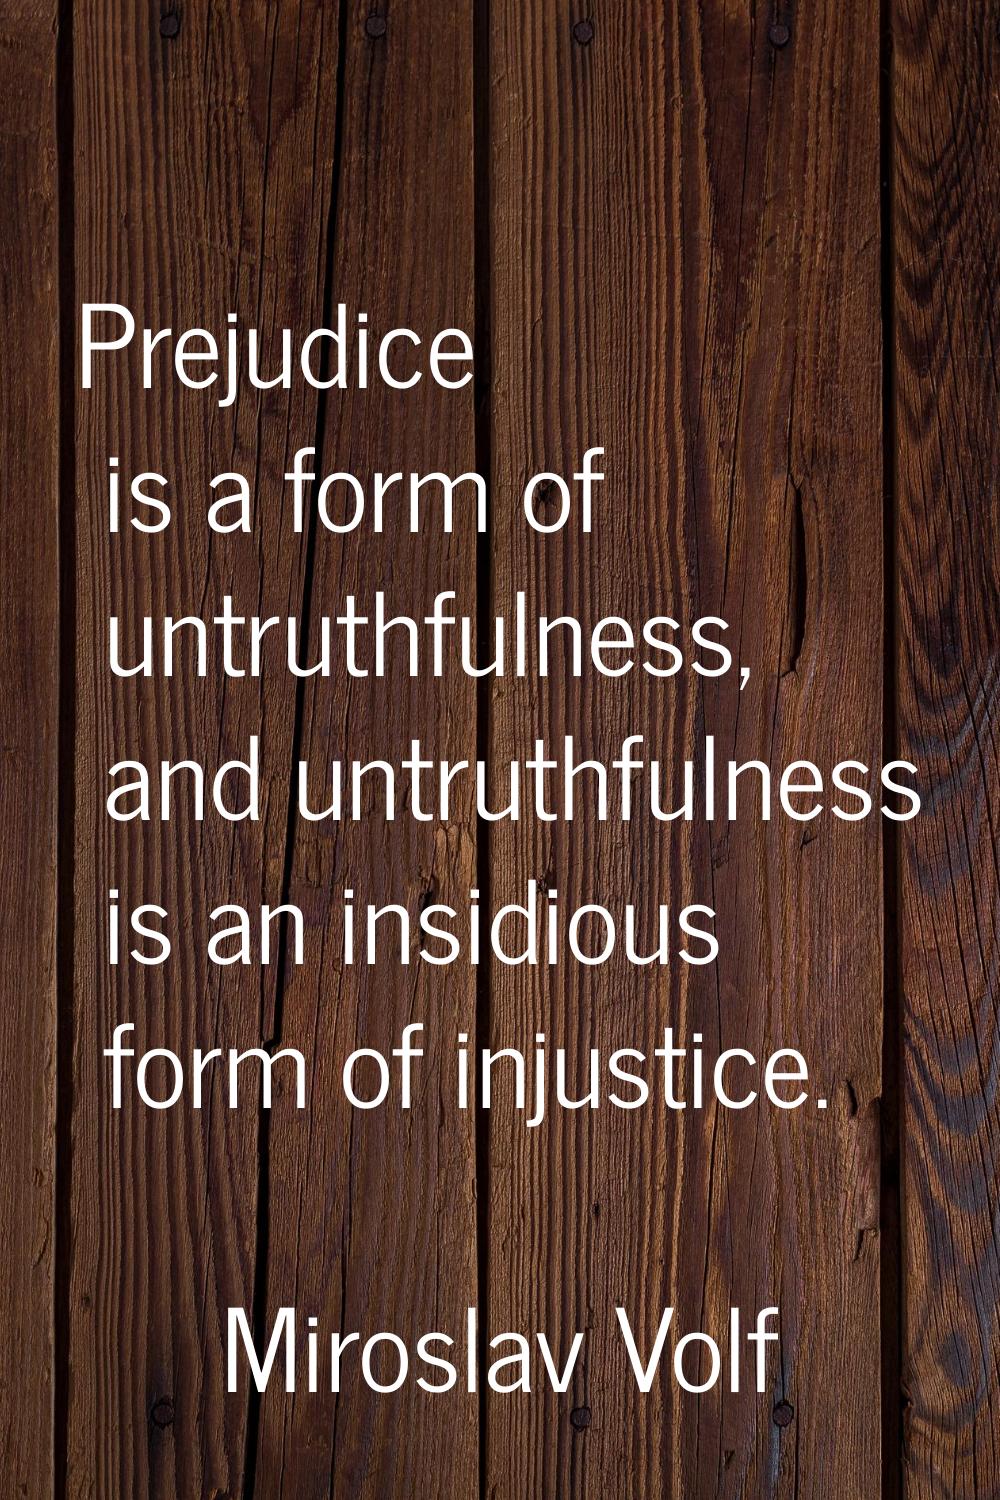 Prejudice is a form of untruthfulness, and untruthfulness is an insidious form of injustice.